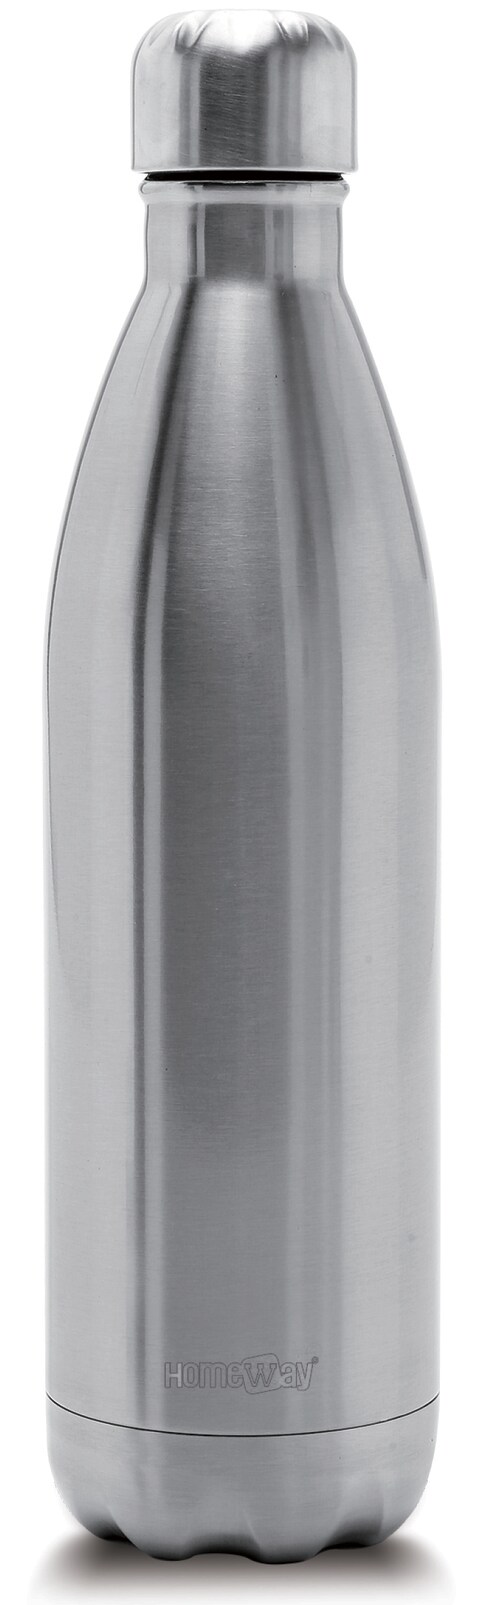 Homeway - 0.5 Liter Volume Capacity Sports Flask, Stainless Steel Outer &amp; Inner Wall, Hot / Cold Drink Compatable, Lightweight, Grey - Hw-1185